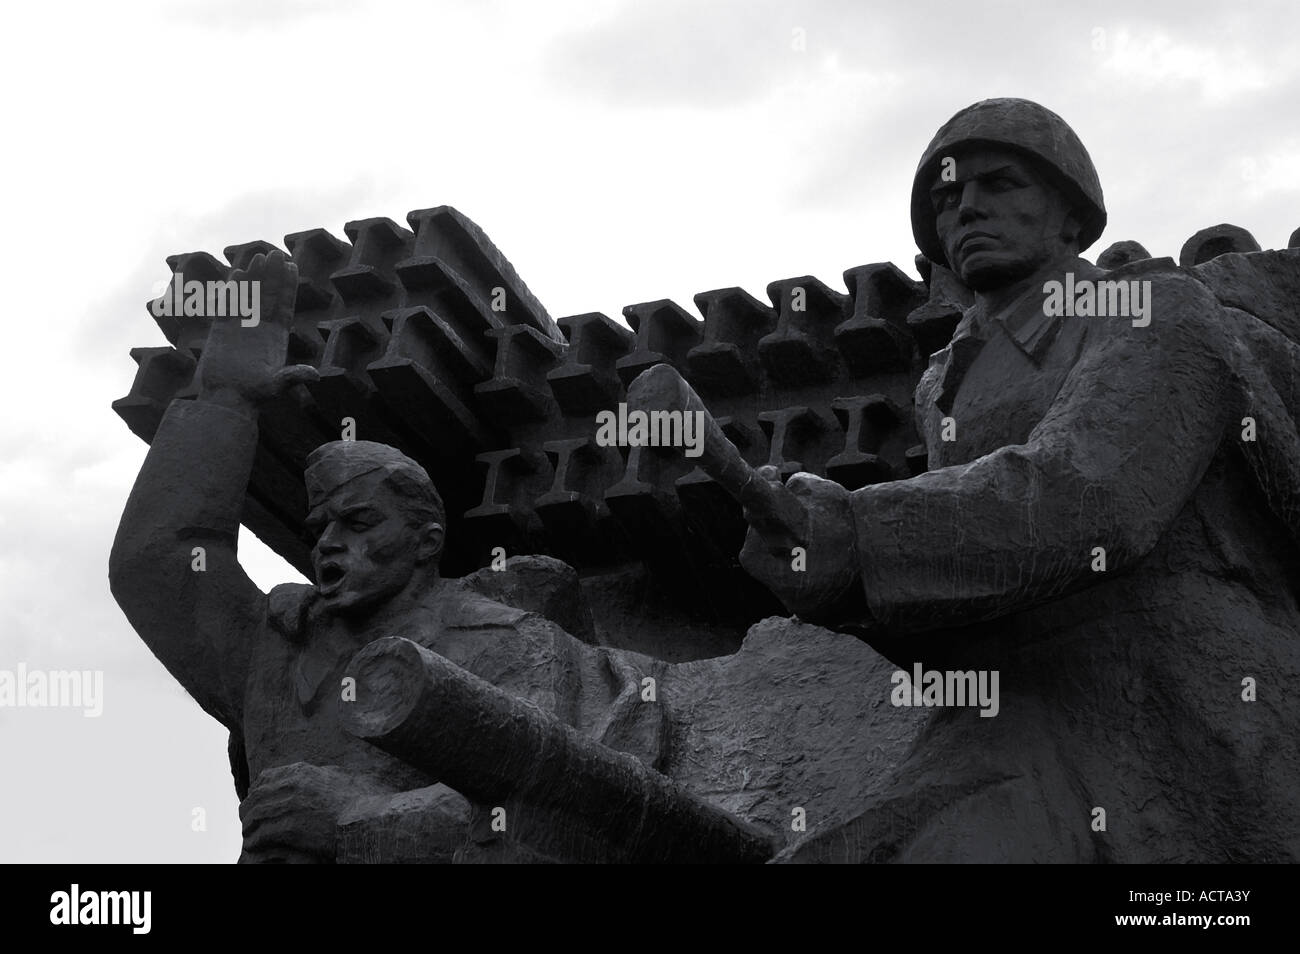 Soviet army soldiers World War Two memorial Stock Photo